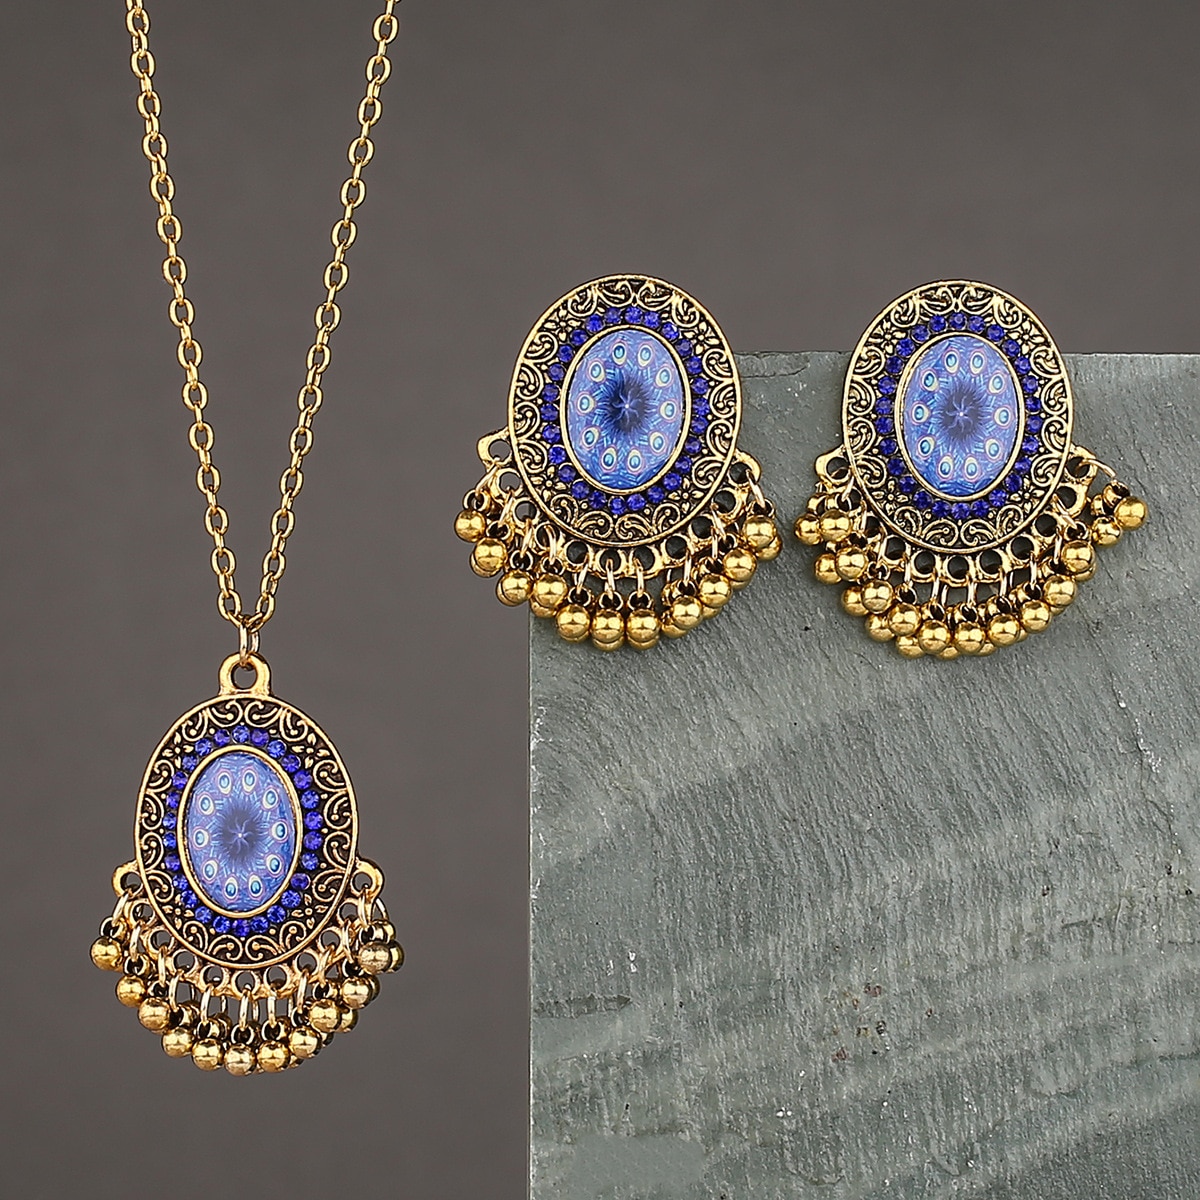 Afghan-Vintage-Tribal-Blue-Flower-Statement-Necklace-Earring-Jewelry-Sets-Gold-Color-Indian-Chain-Ne-3256804350070961-2